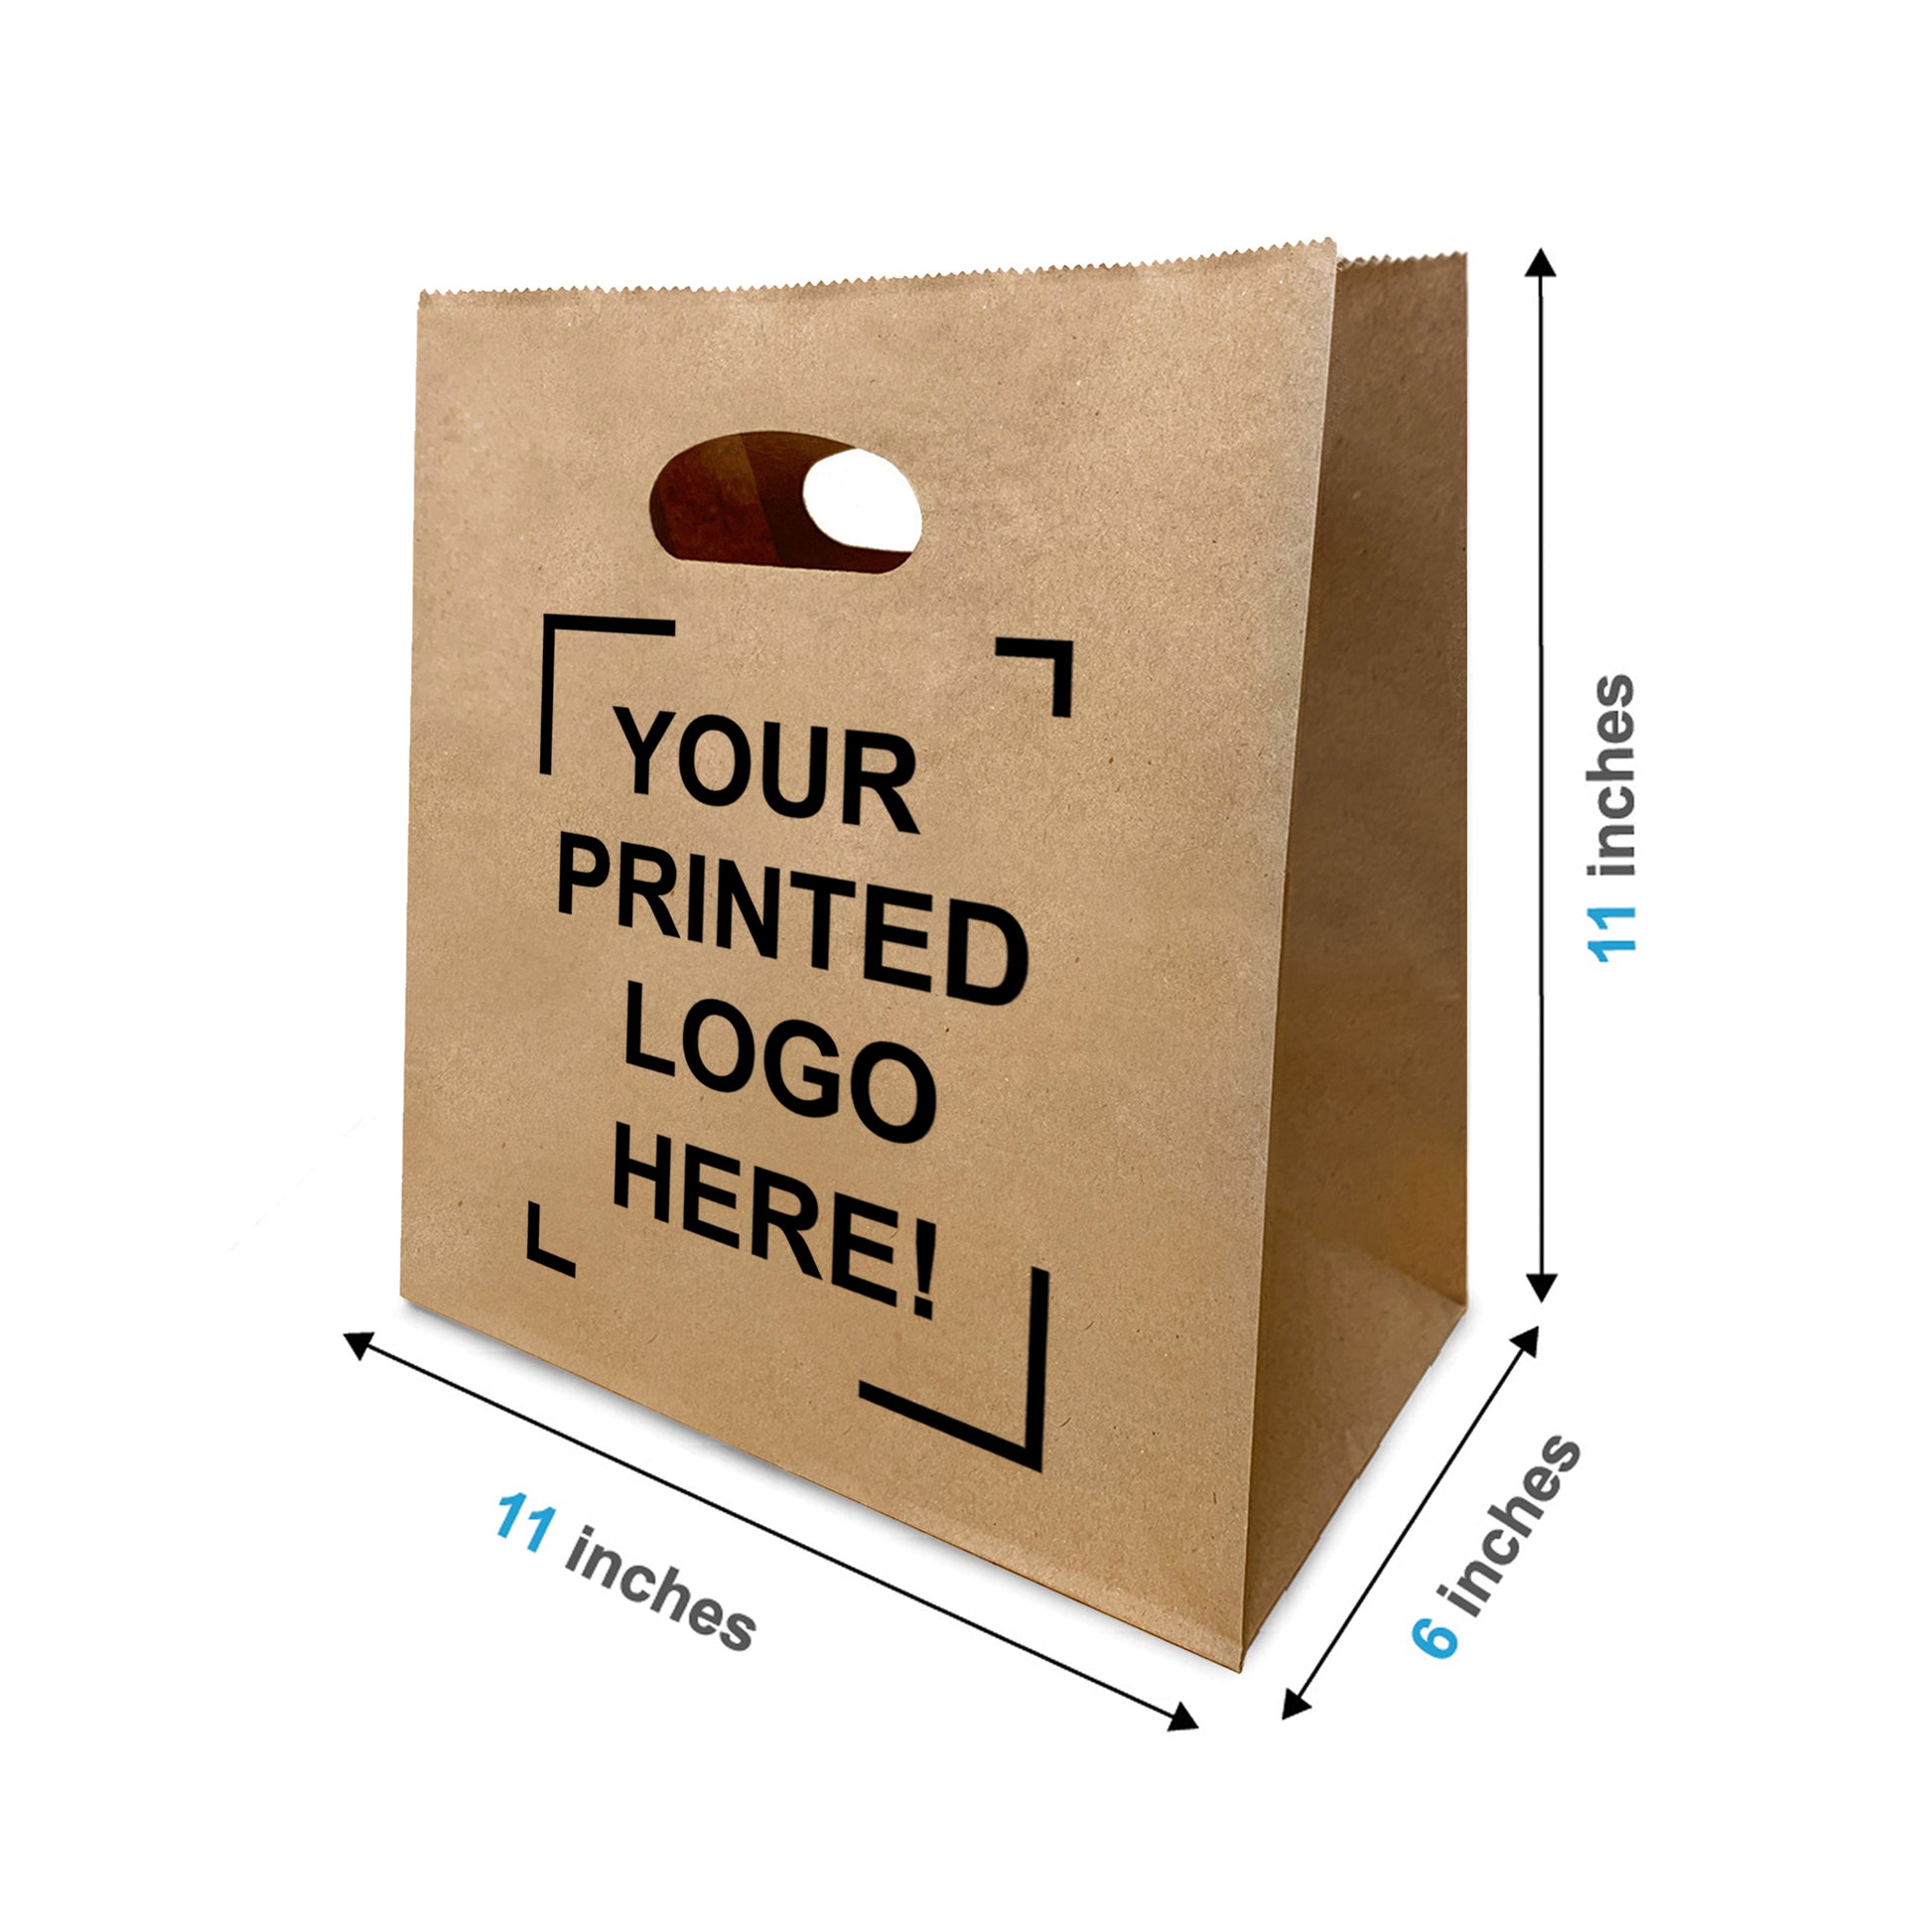 400 Pcs, Anna, 11x6x11 inches, Kraft Paper Bags, with Die Cut Handle, Full Color Custom Print